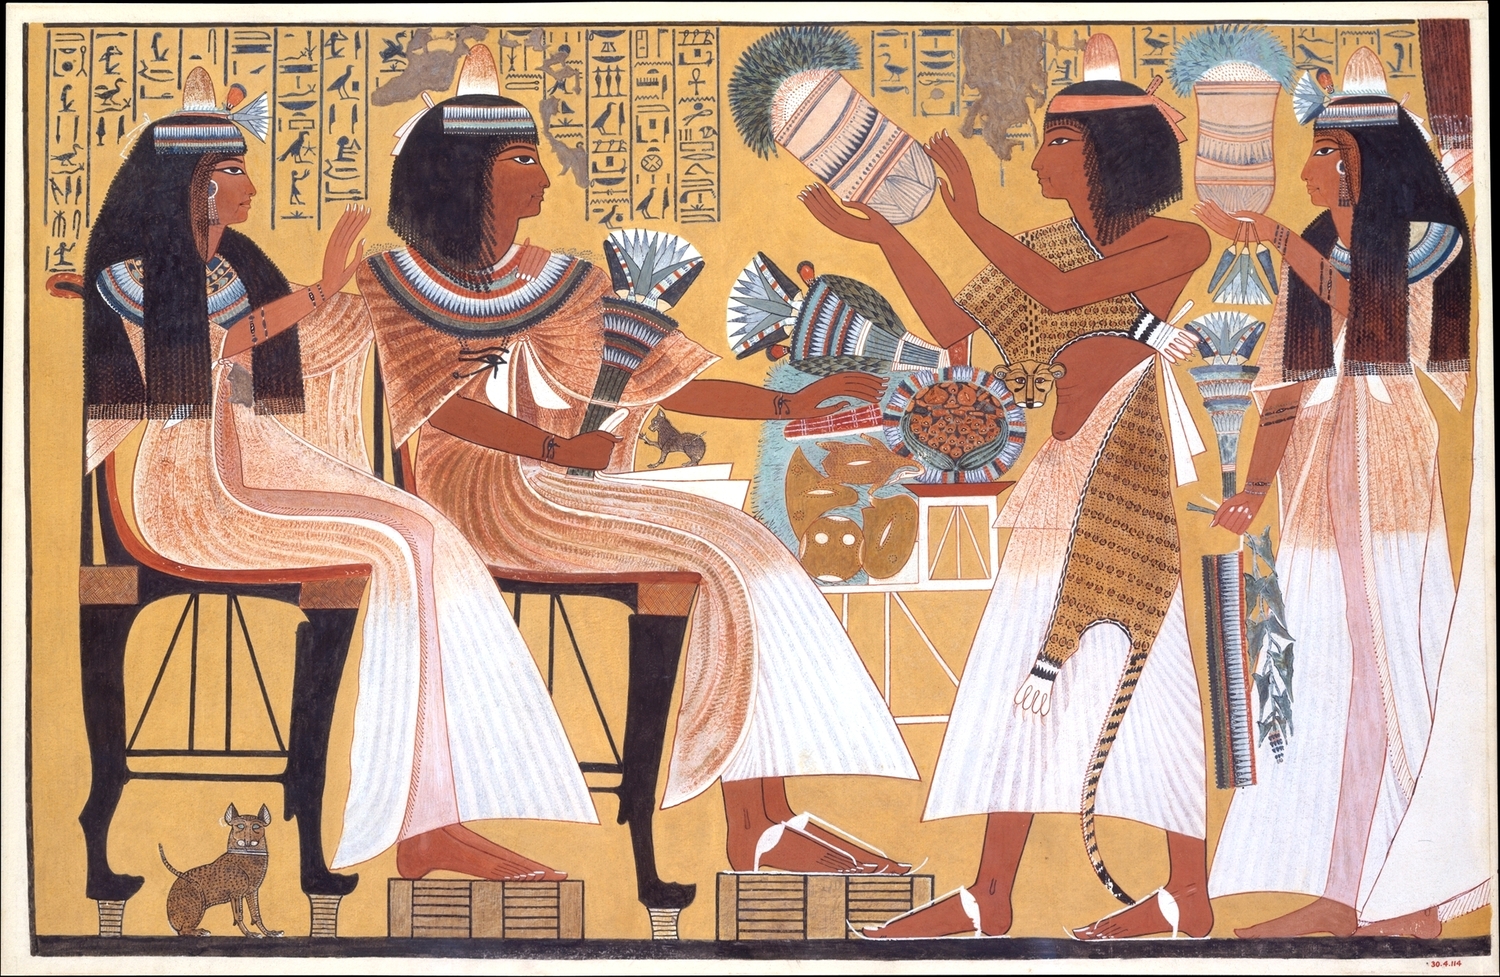 Egyptian imagery with humans and cats